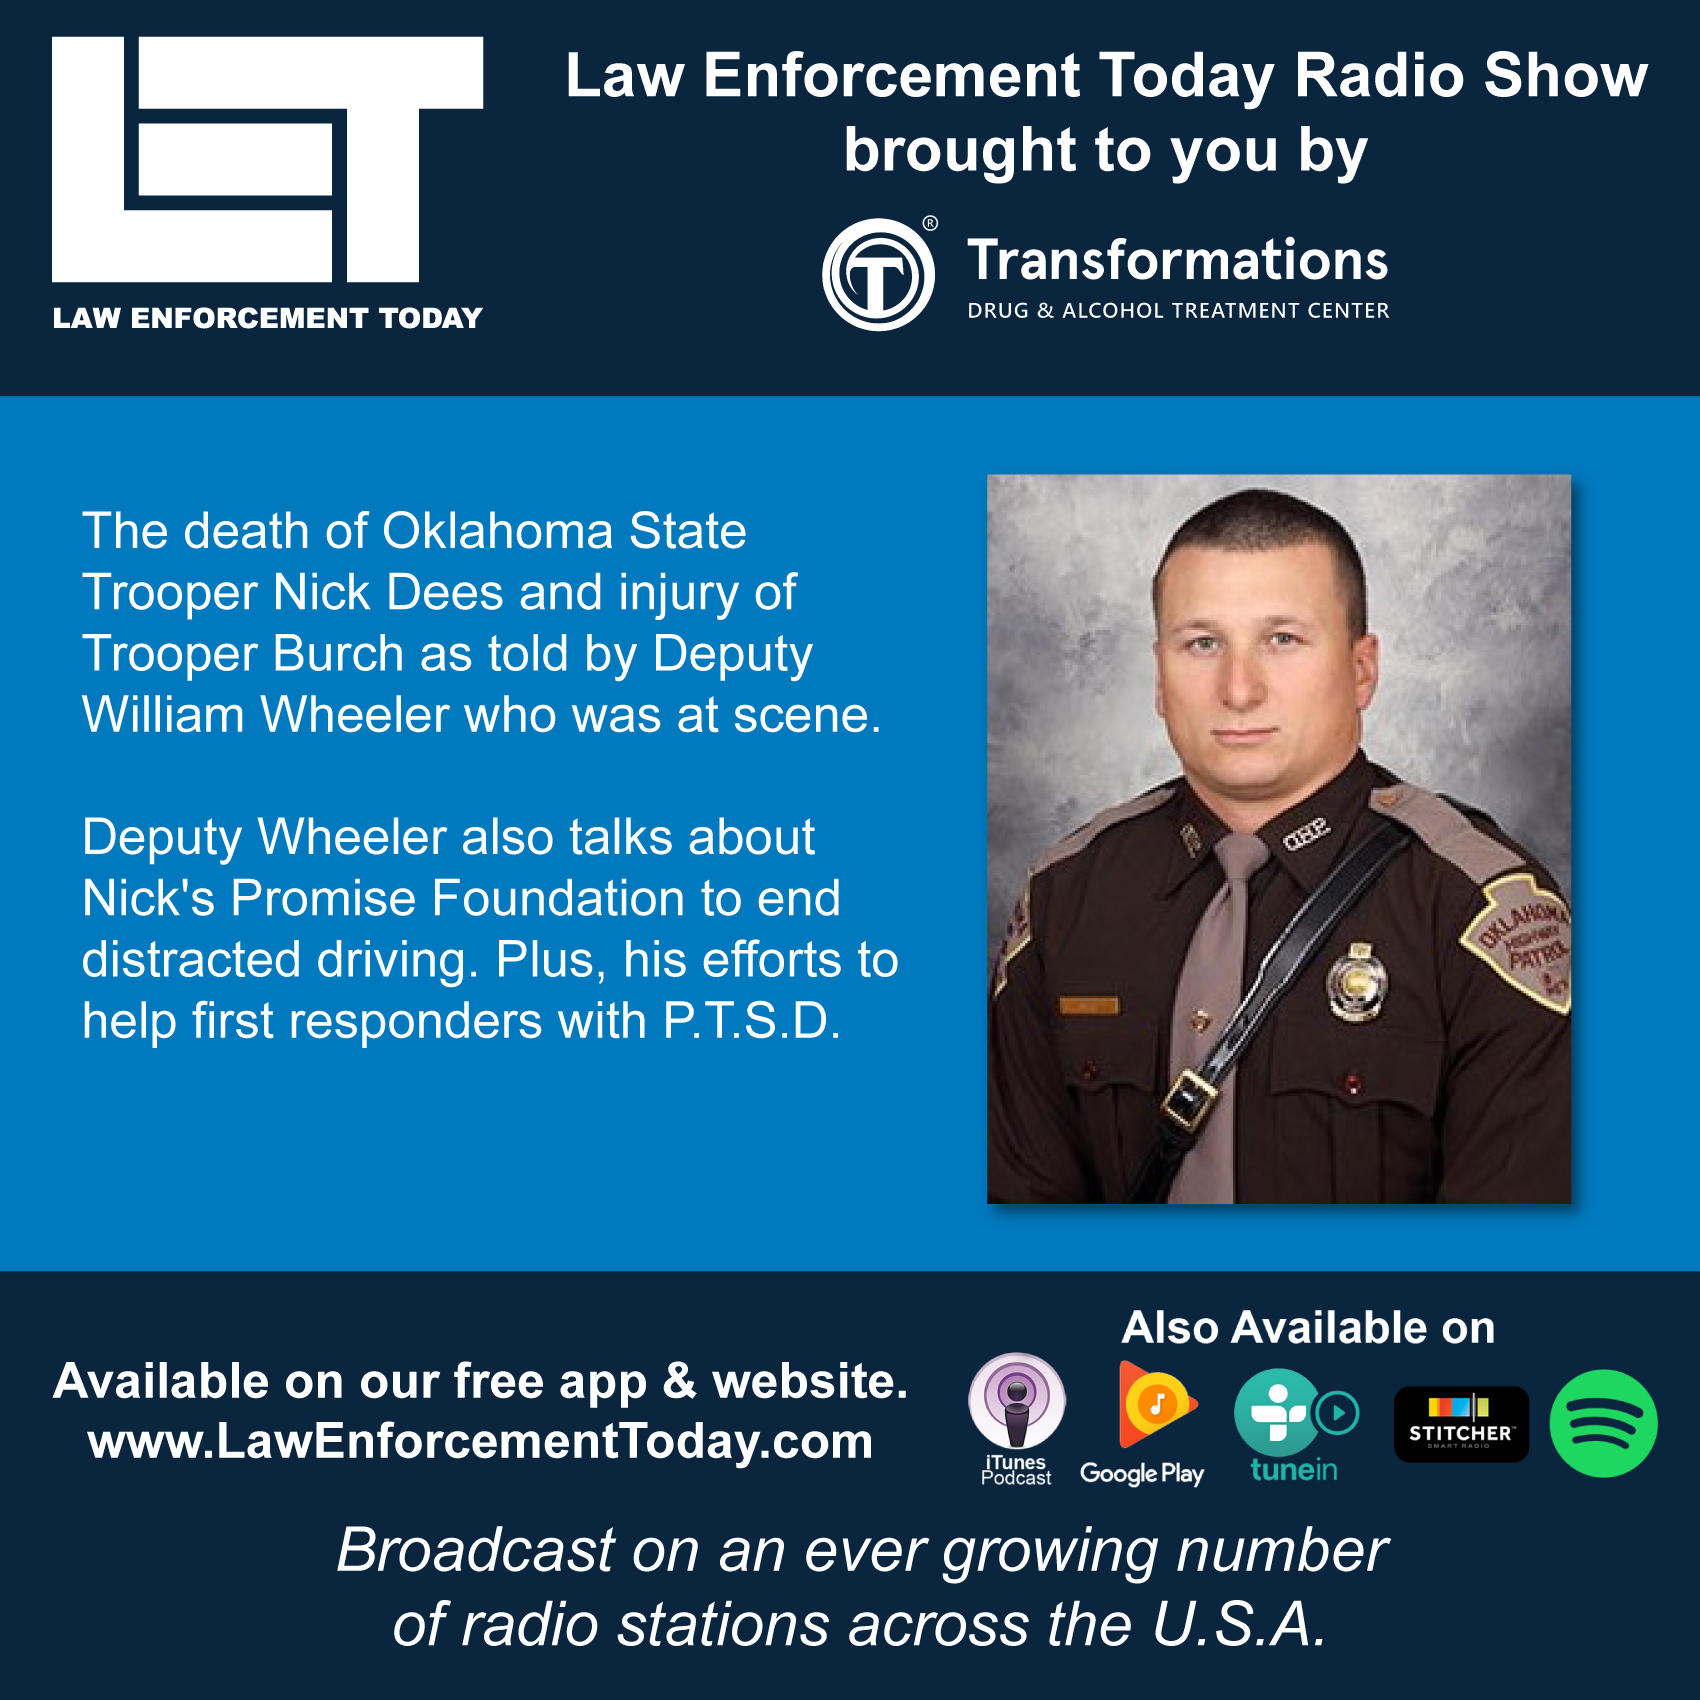 S2E42: The Incident that killed Oklahoma State Trooper Nick Dees and injured Trooper Burch